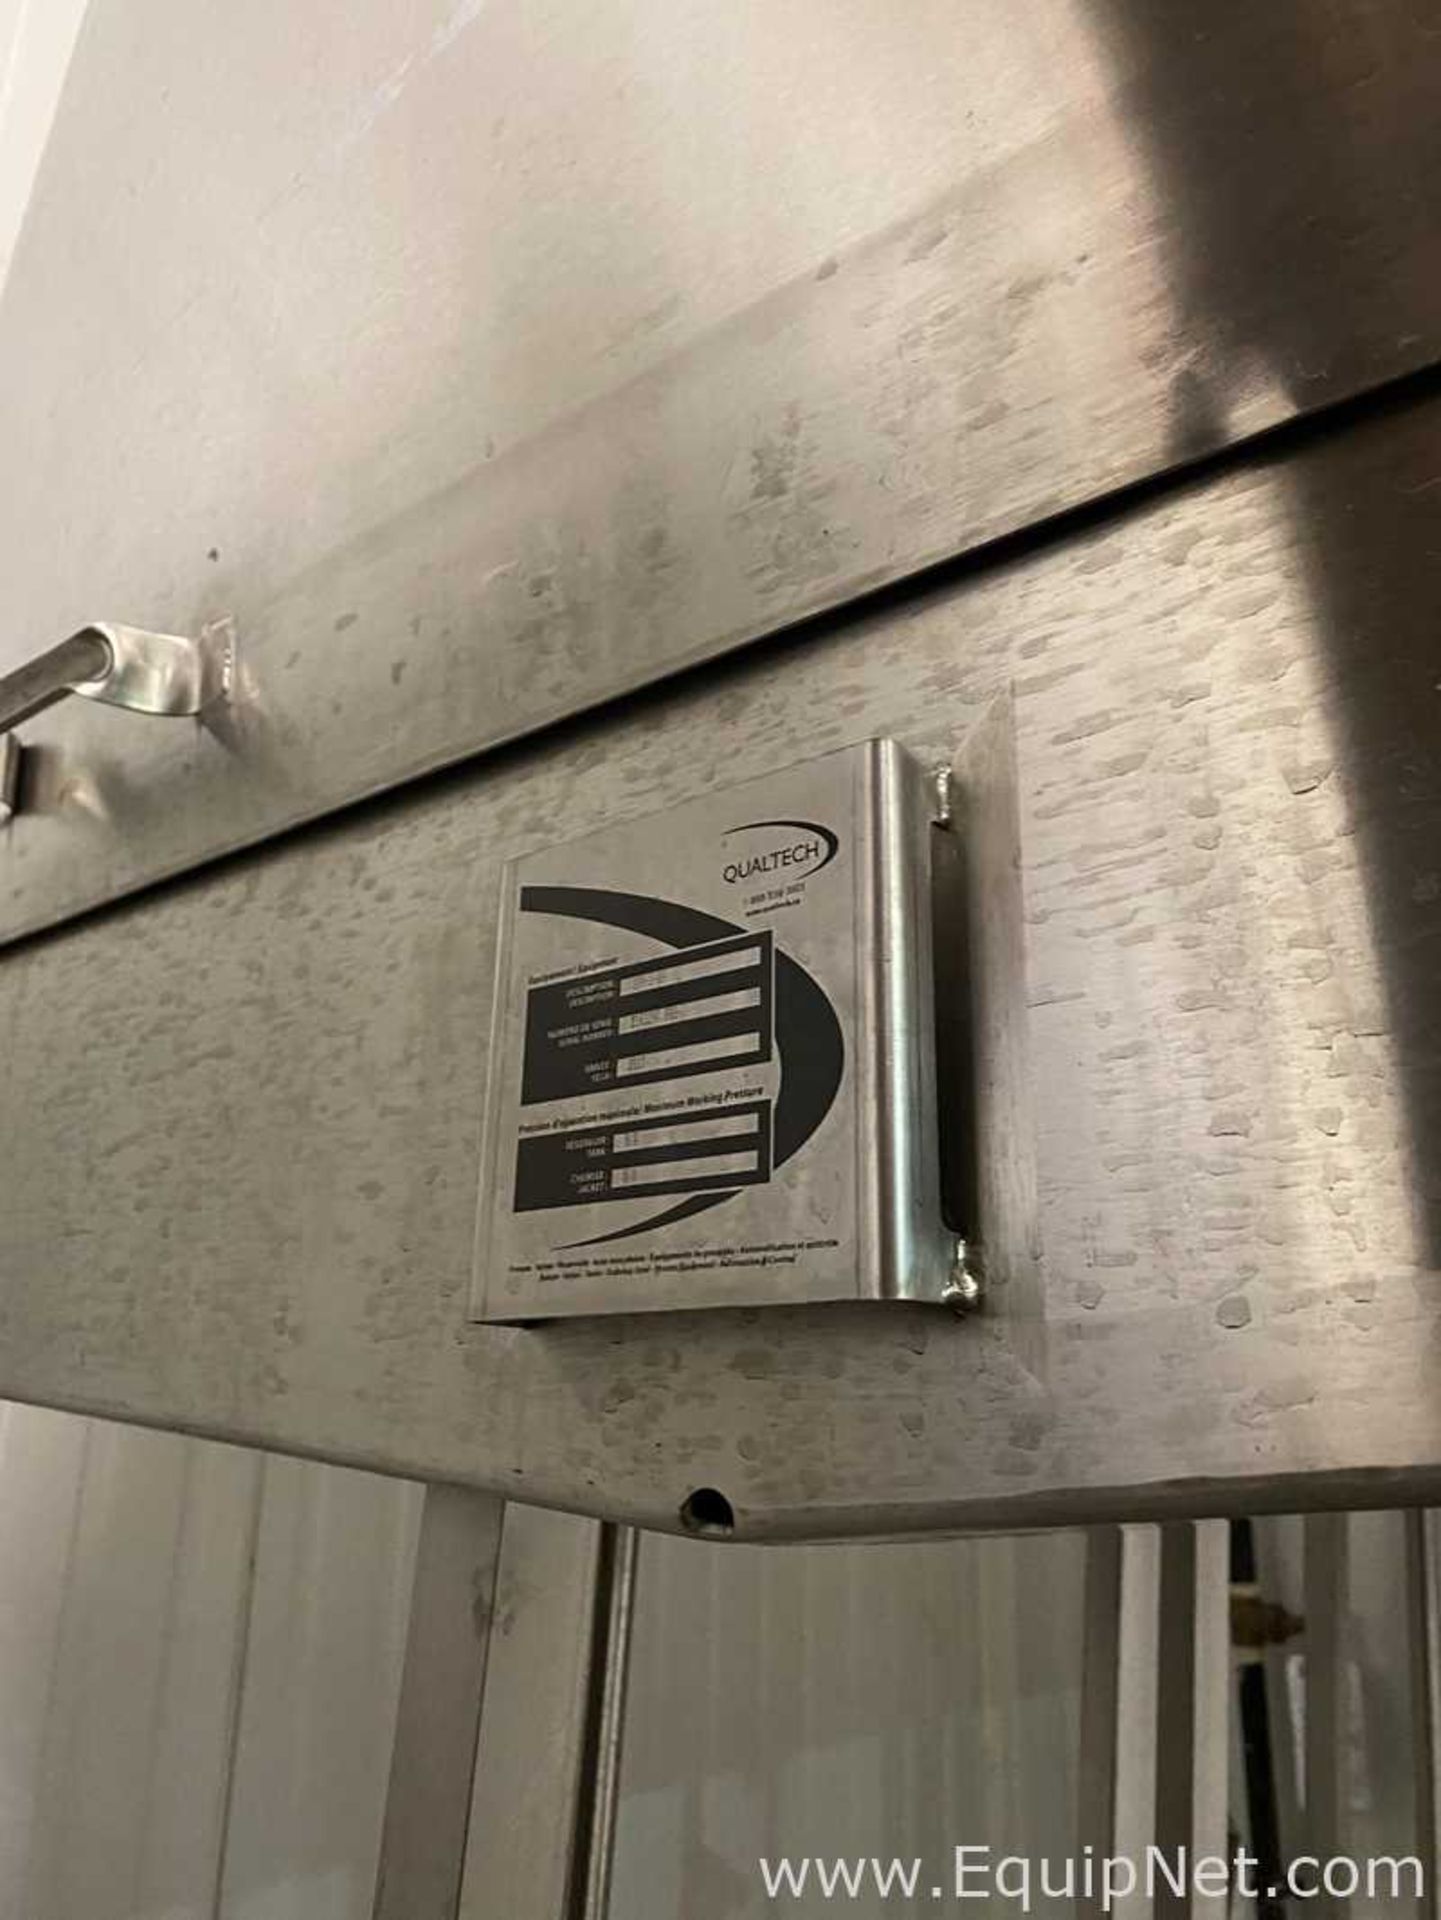 Qualtech PFV-2-06 Vertical Cheese Press - Image 5 of 6